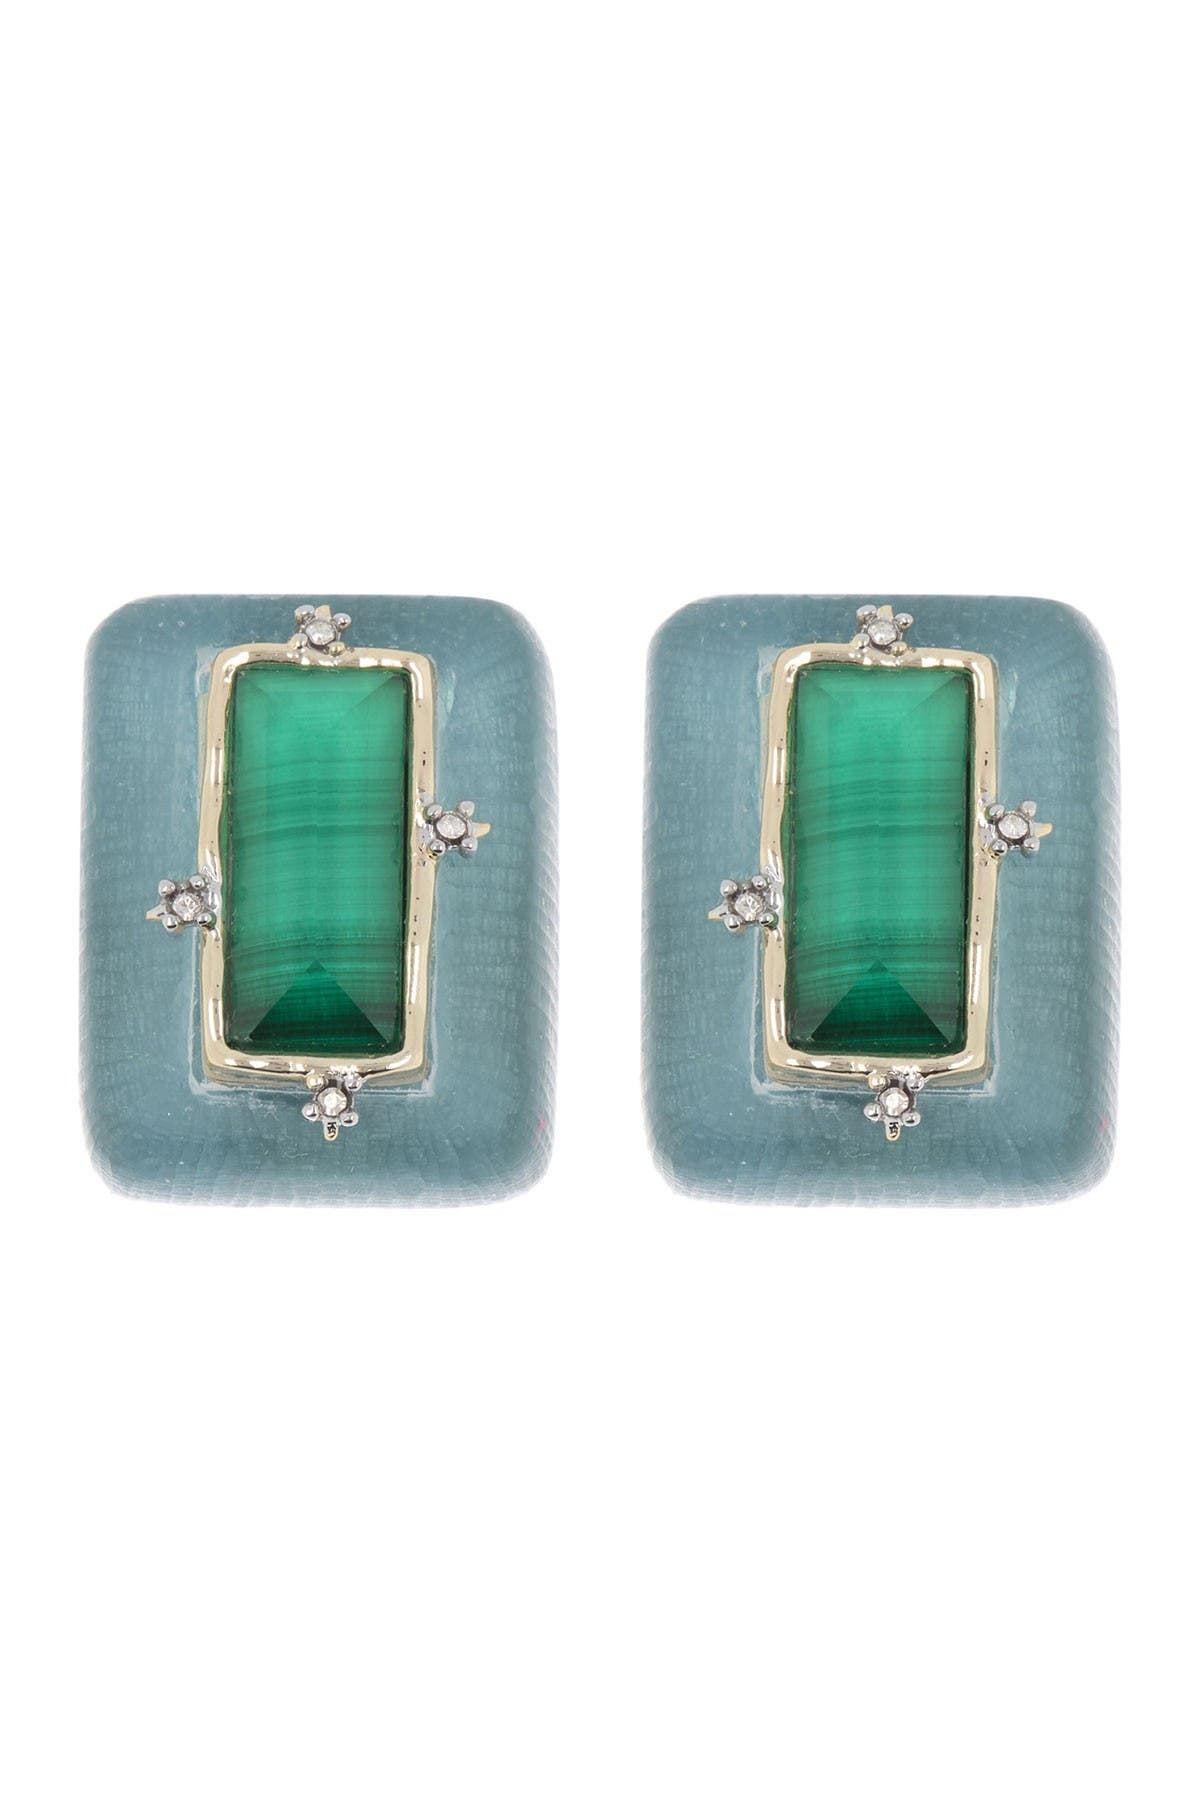 Alexis Bittar Stone Studded Retro Clip Button Earrings In Montana Bl